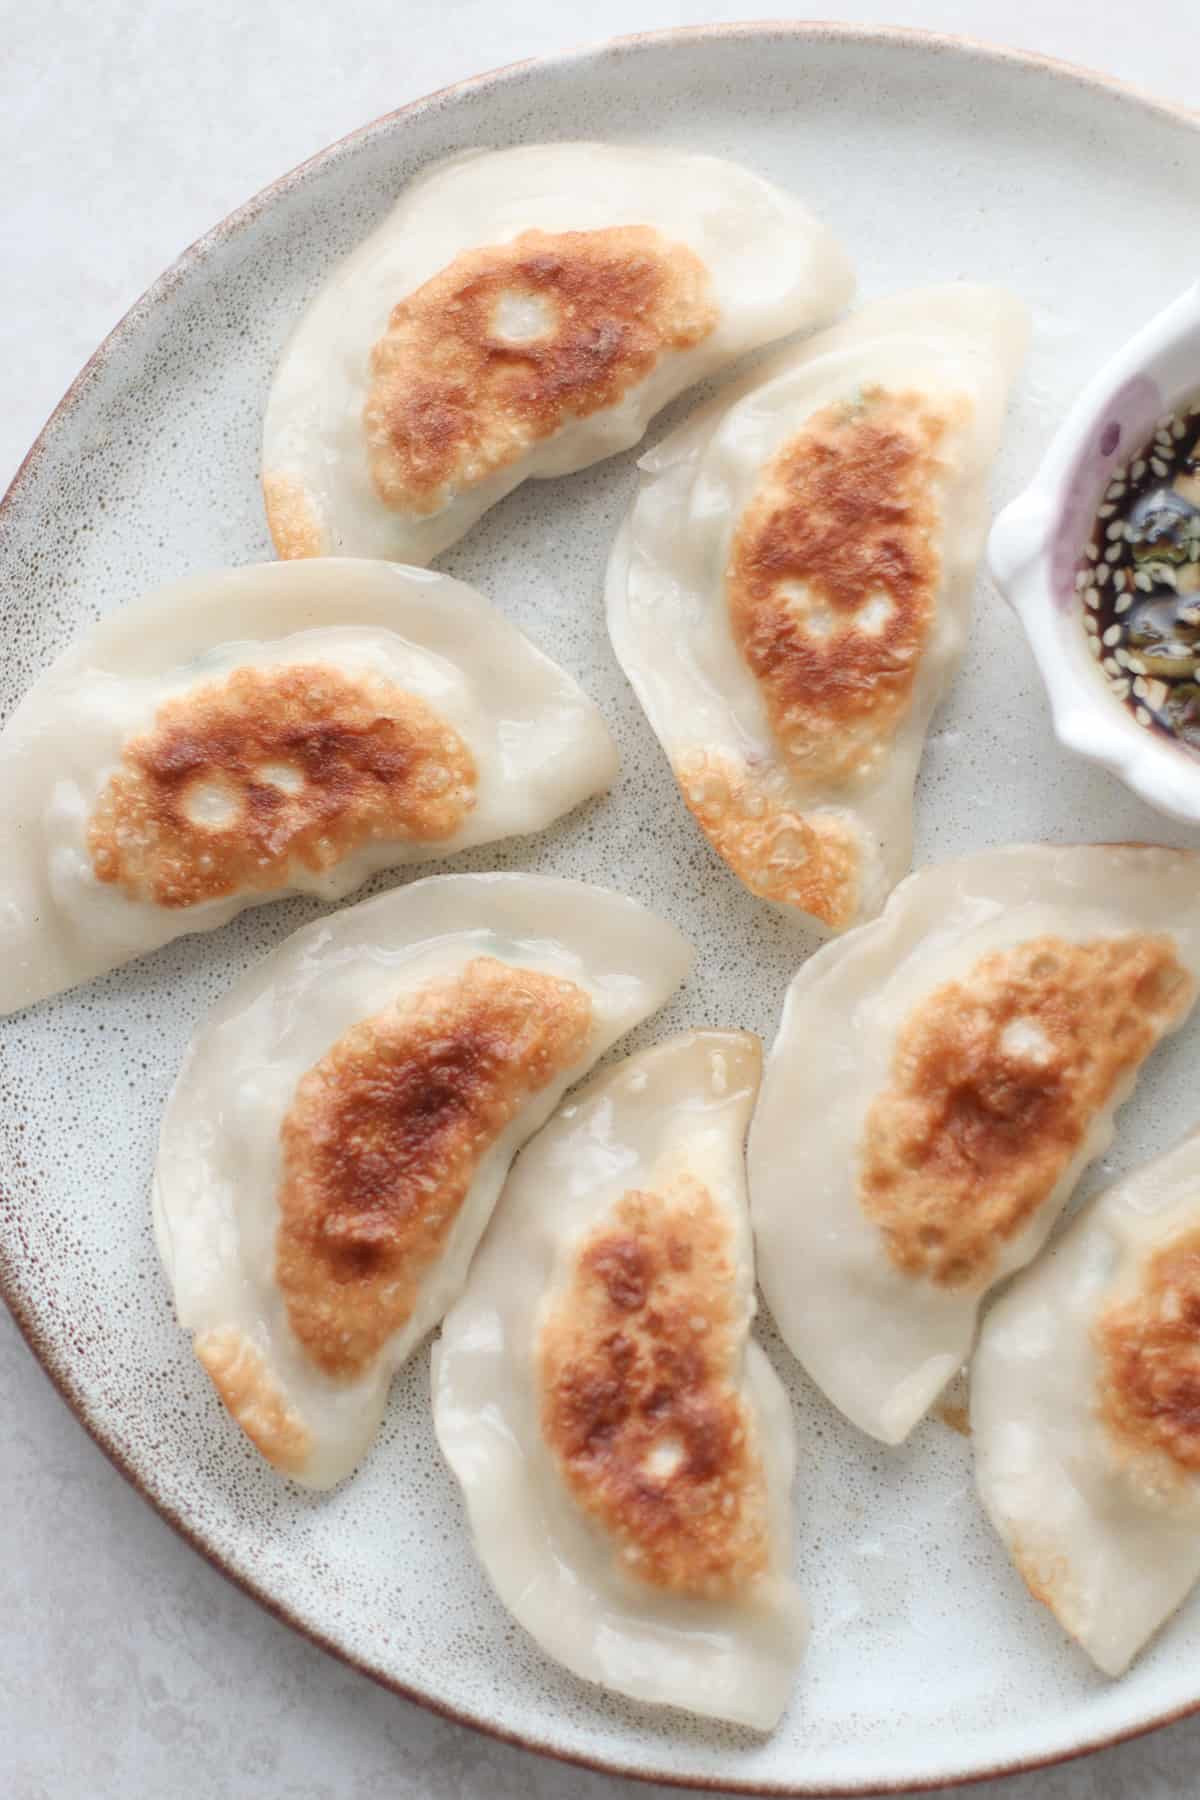 pan fried dumplings on a plate with dipping sauce.